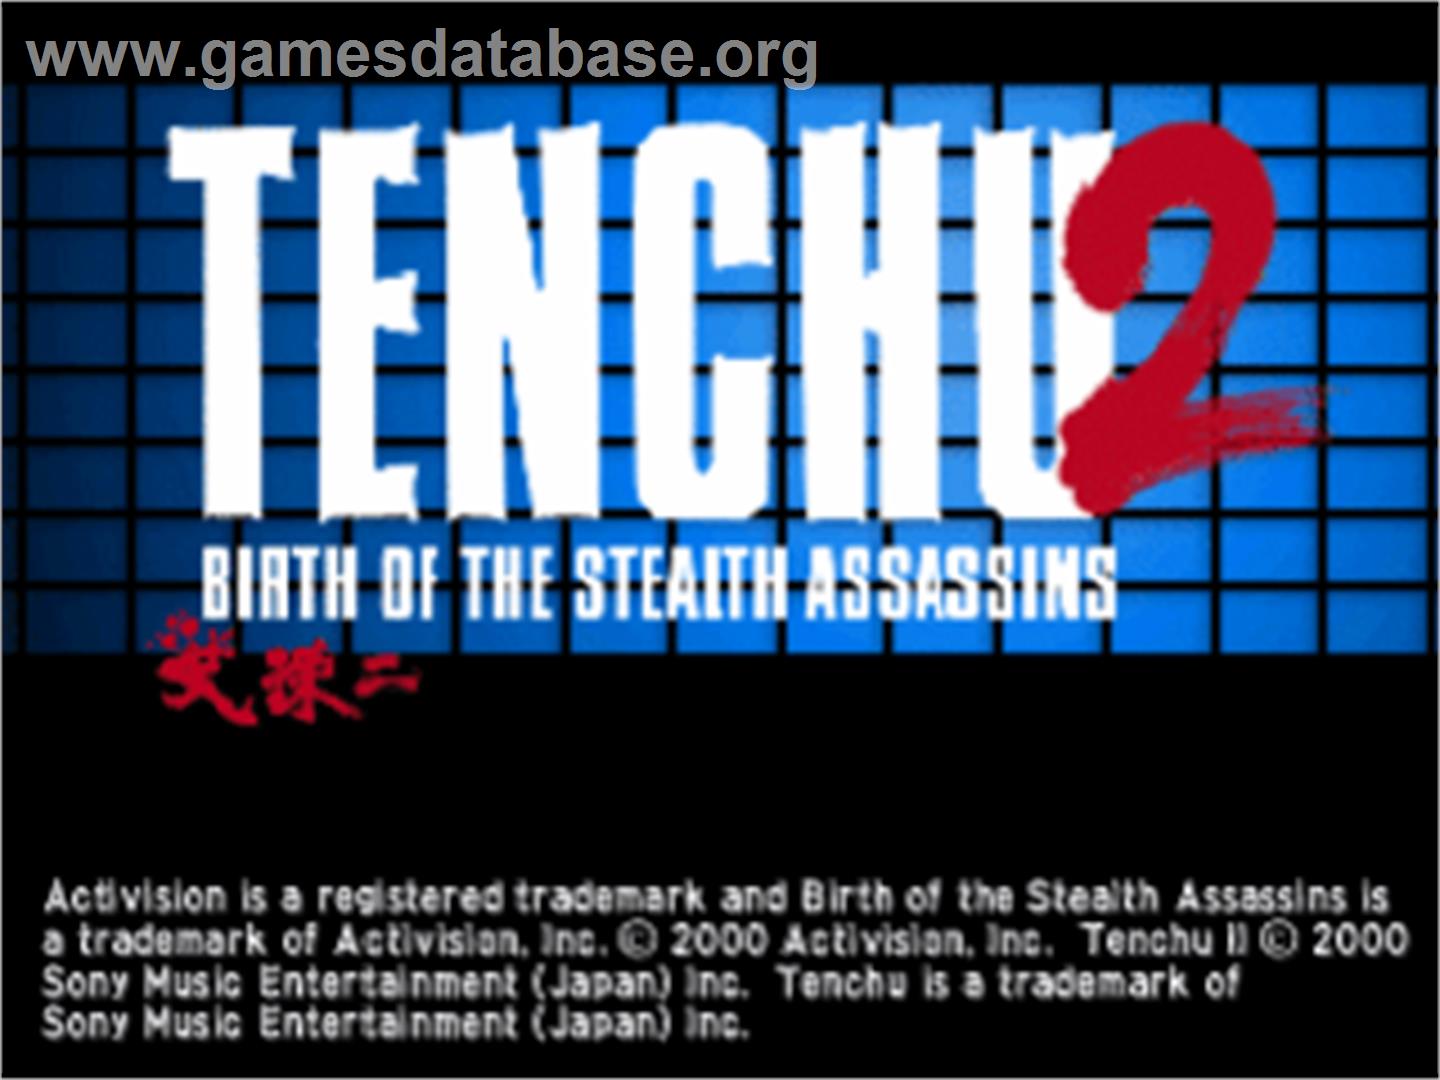 Tenchu 2: Birth of the Stealth Assassins - Sony Playstation - Artwork - Title Screen